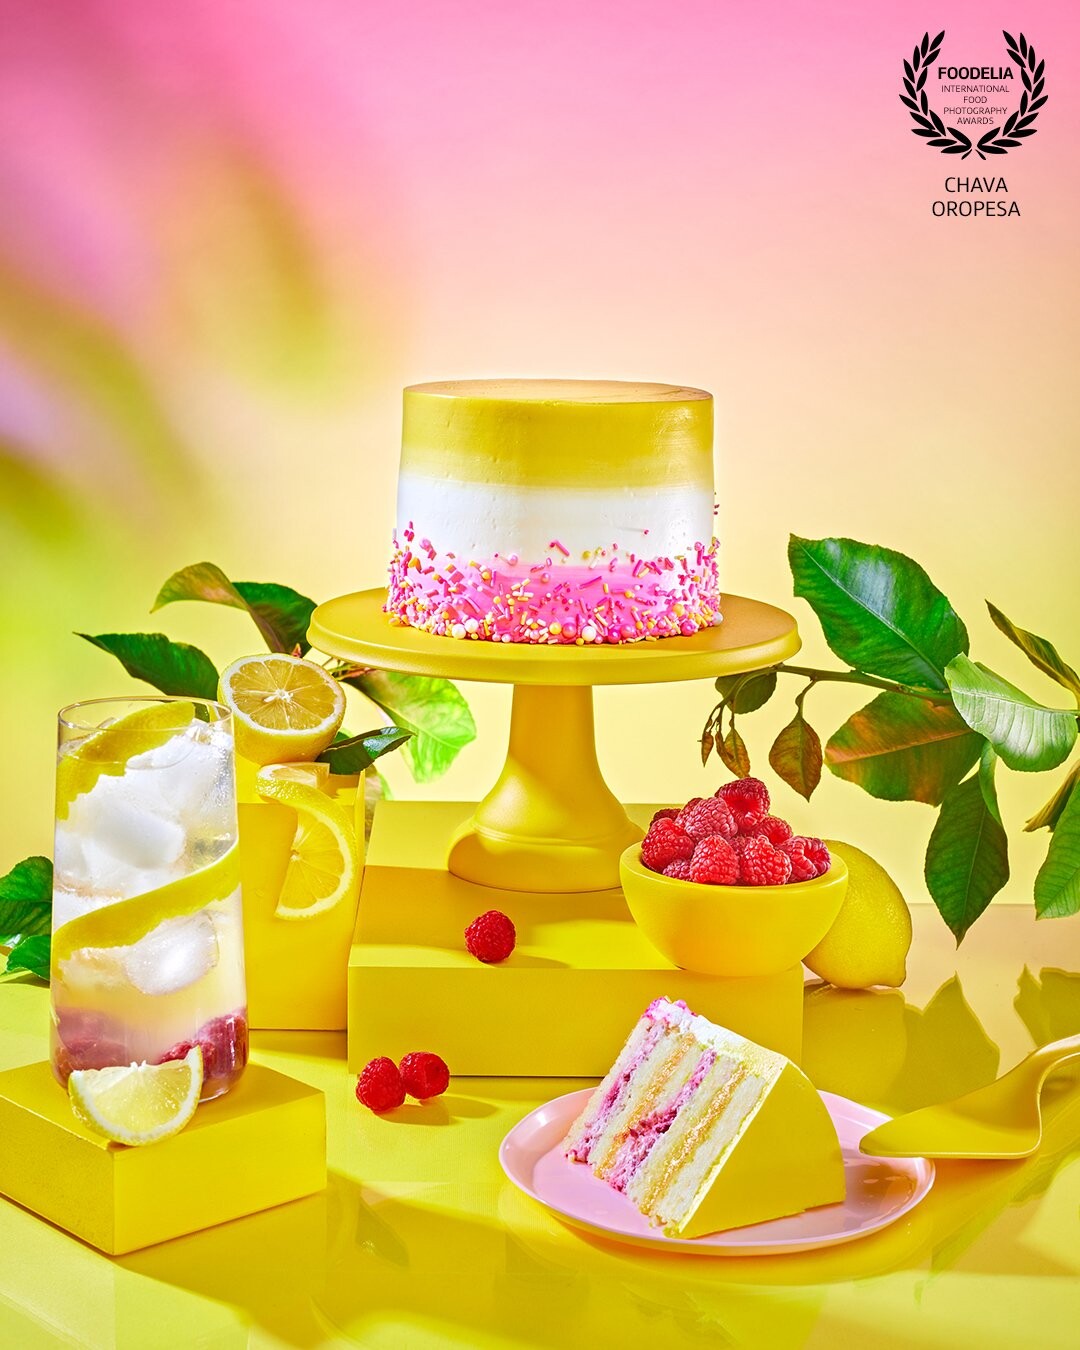 Image created for the launch campaign for a new cake flavor for Noe Valley Bakery.<br />
This Pink Lemonade cake inspired the bright yellow set with red and green accents, creating the color gradient in the background is all done in camera with gels. Hope you enjoy!